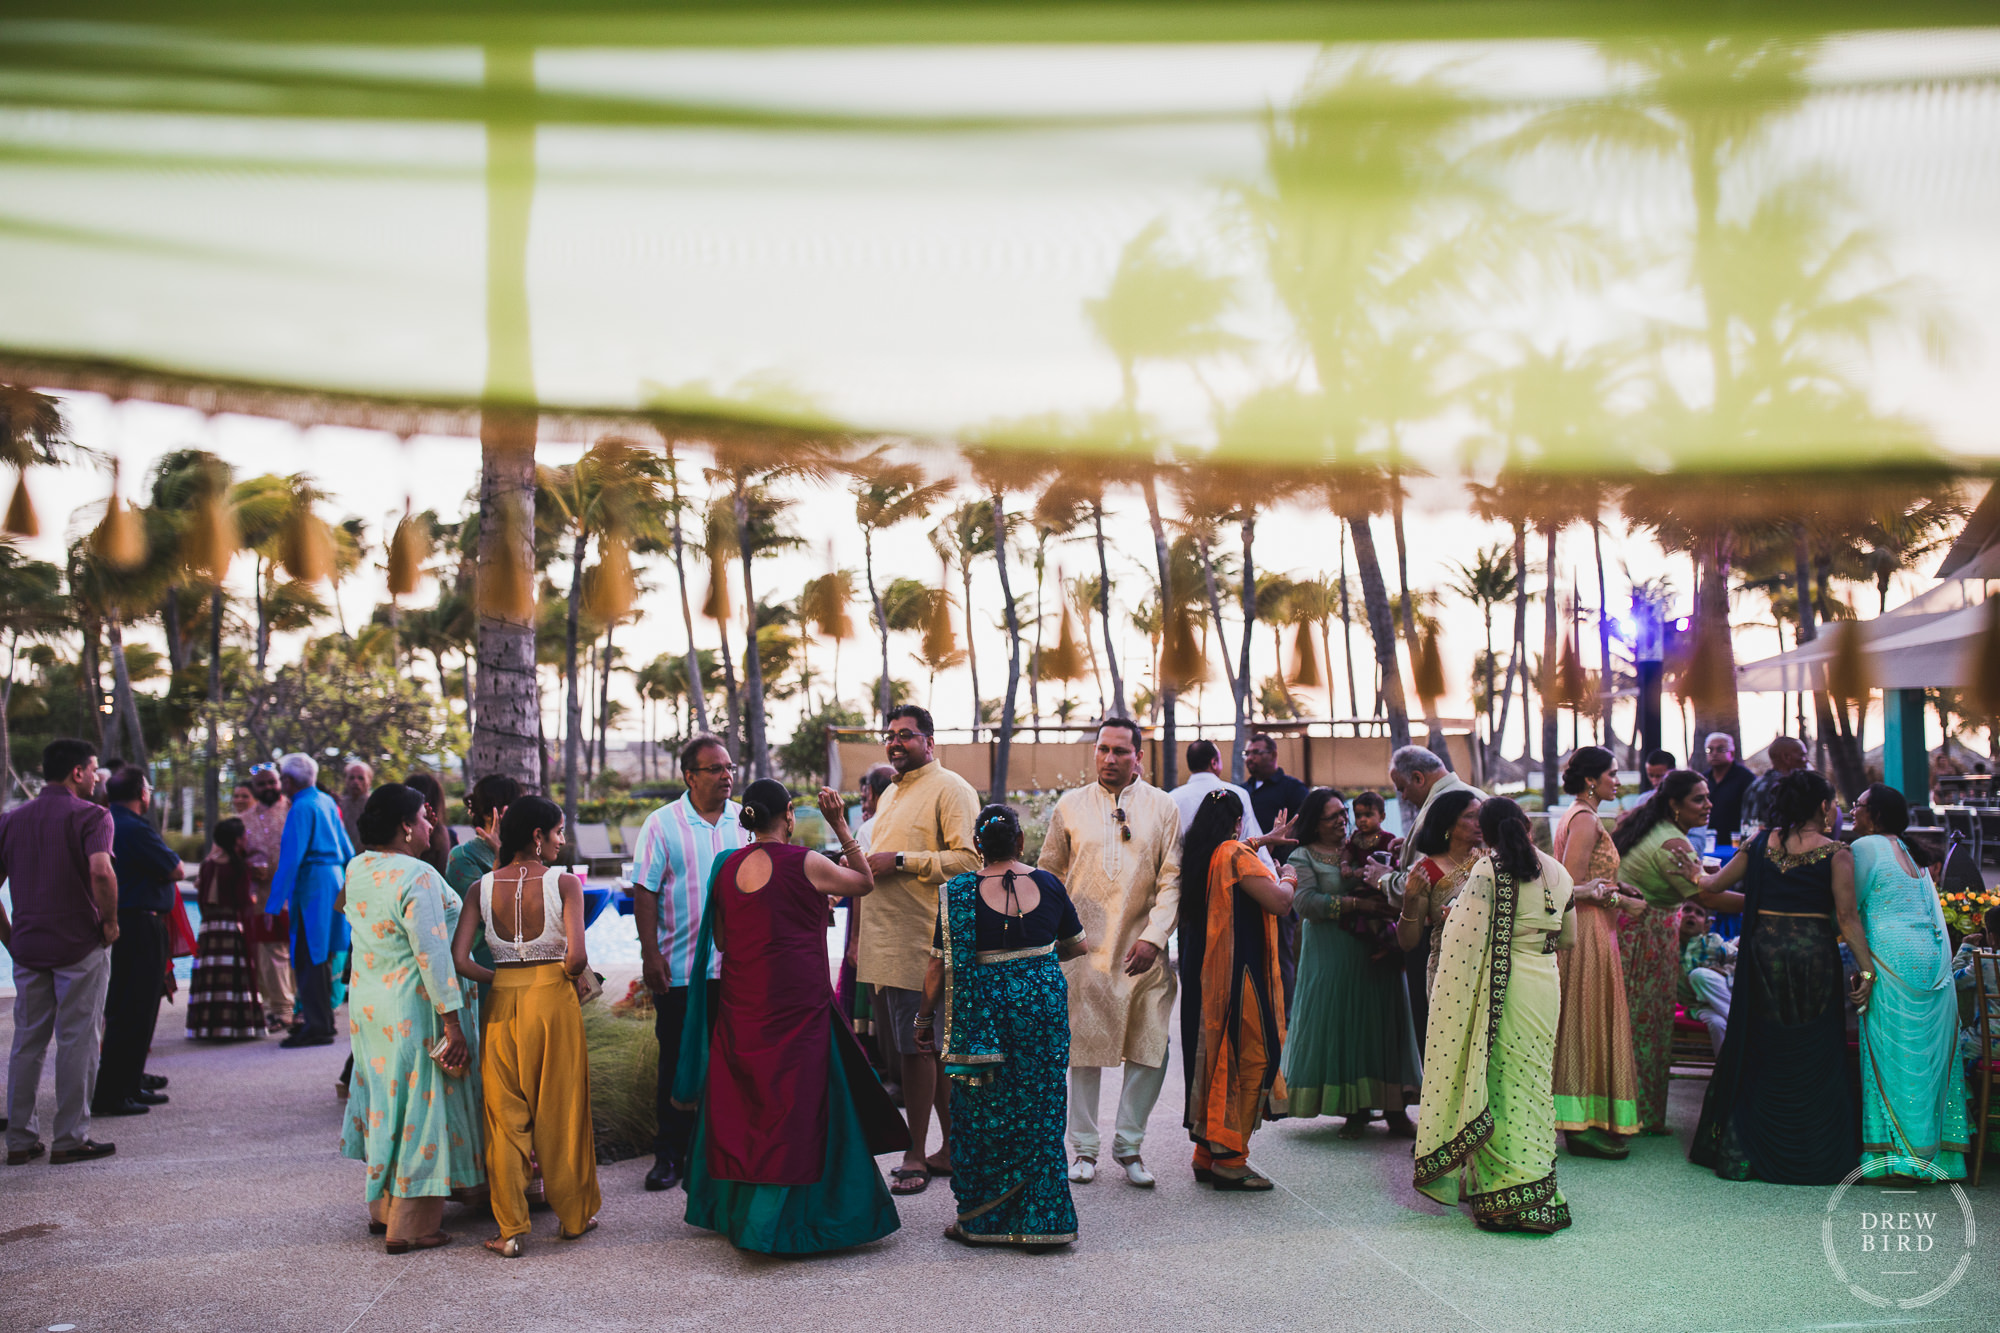 A large group of guests mingle next to the pool during happy hour at sunset for this destination Indian Hindu wedding welcome party at the Hilton Aruba Resort on the Caribbean island of Aruba.